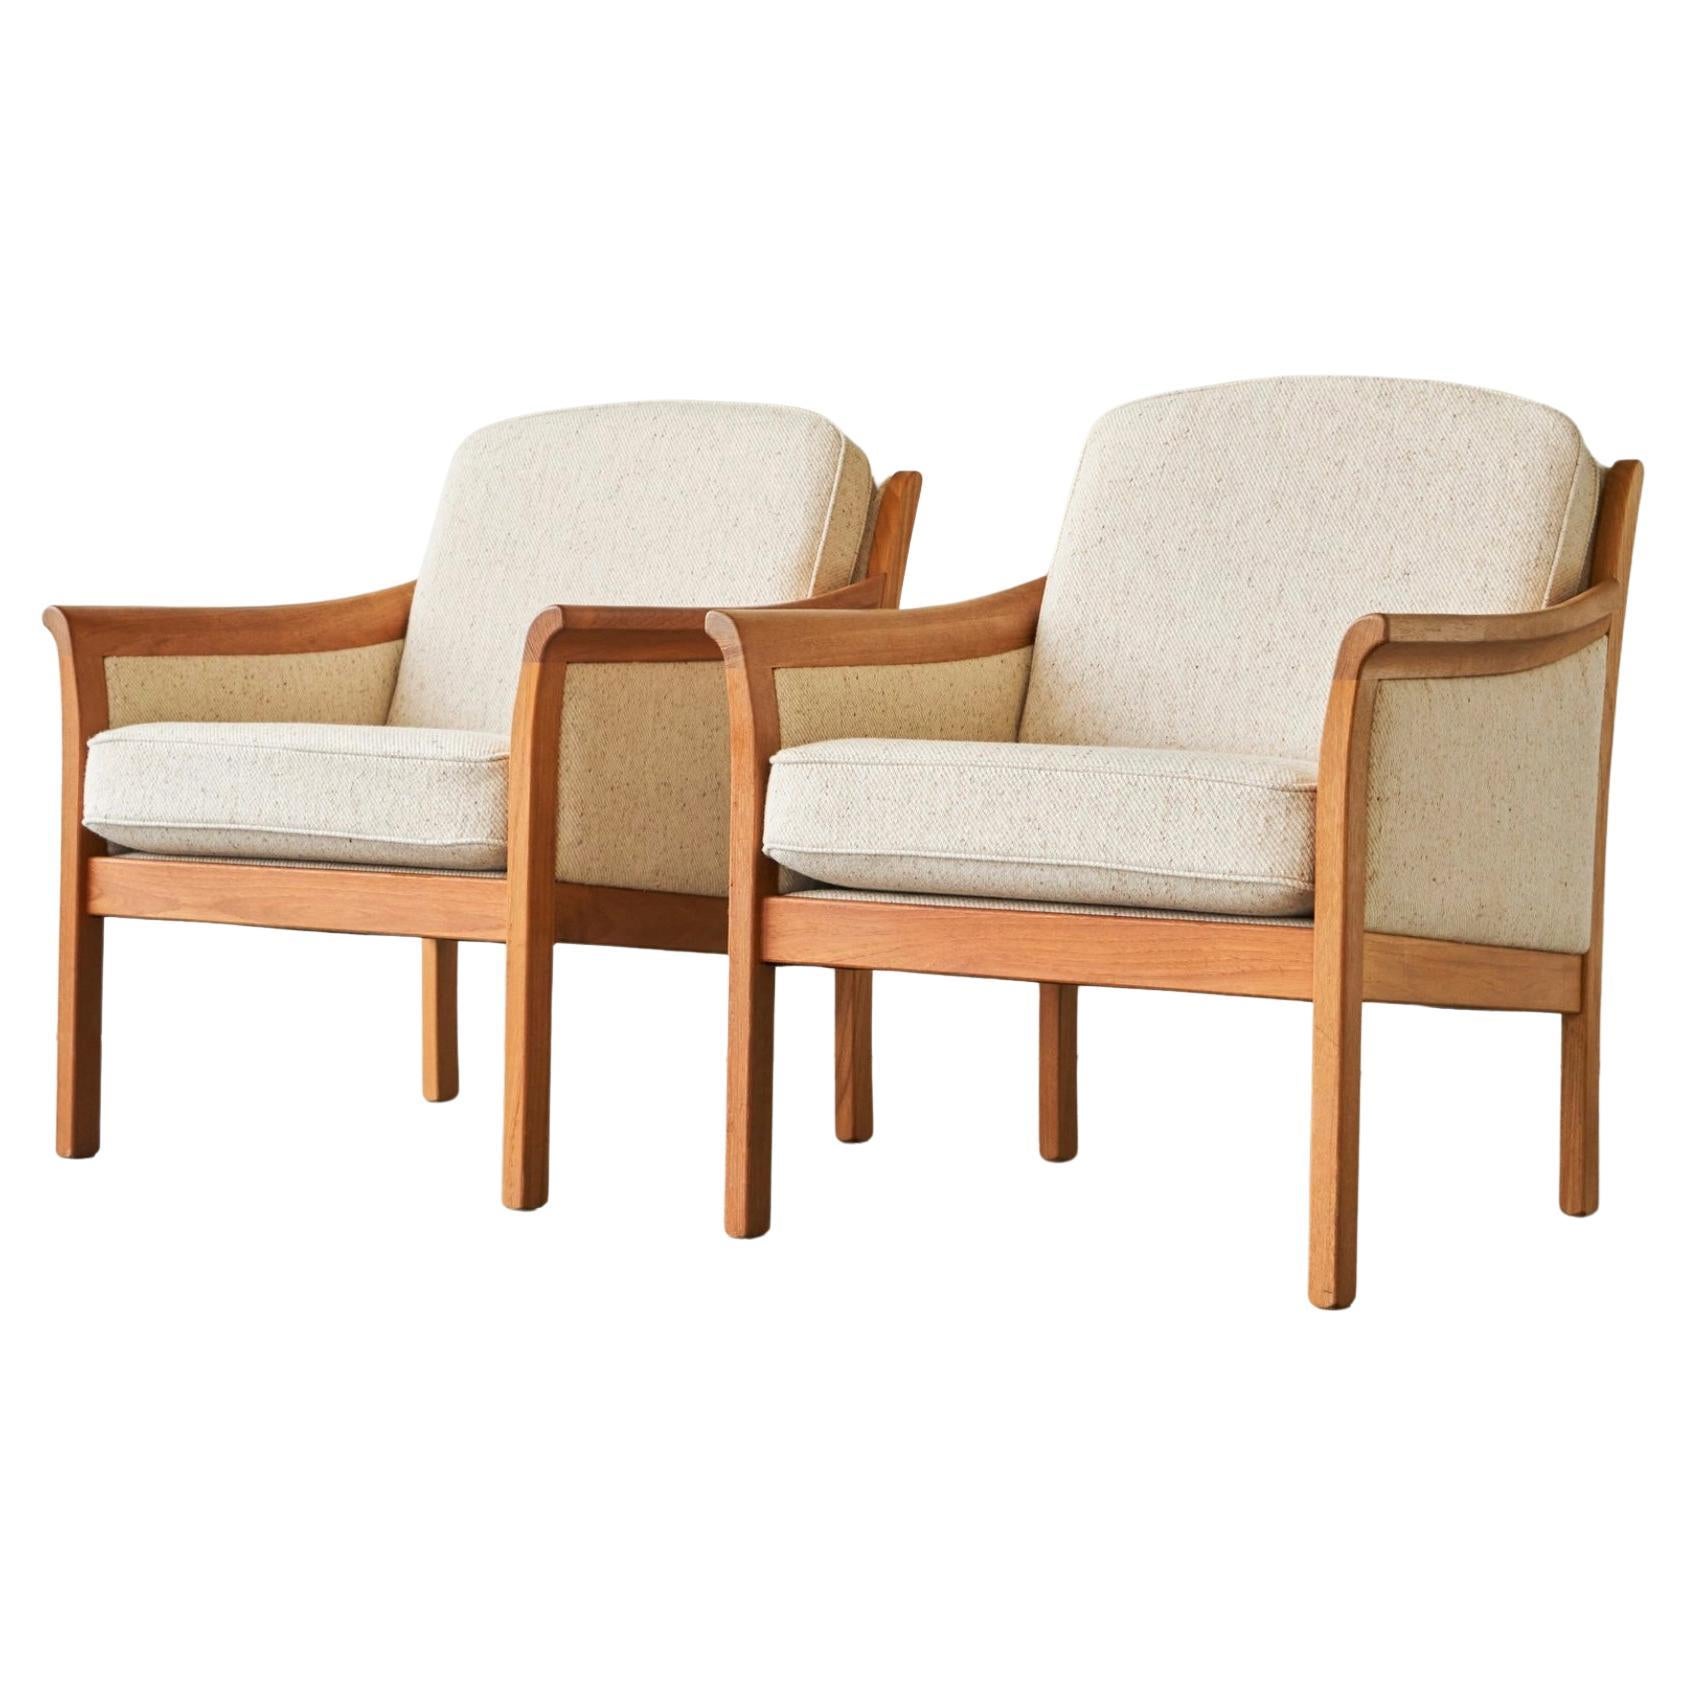 Pair of Scandinavian Lounge Chairs in Wool with Ottoman 1960s